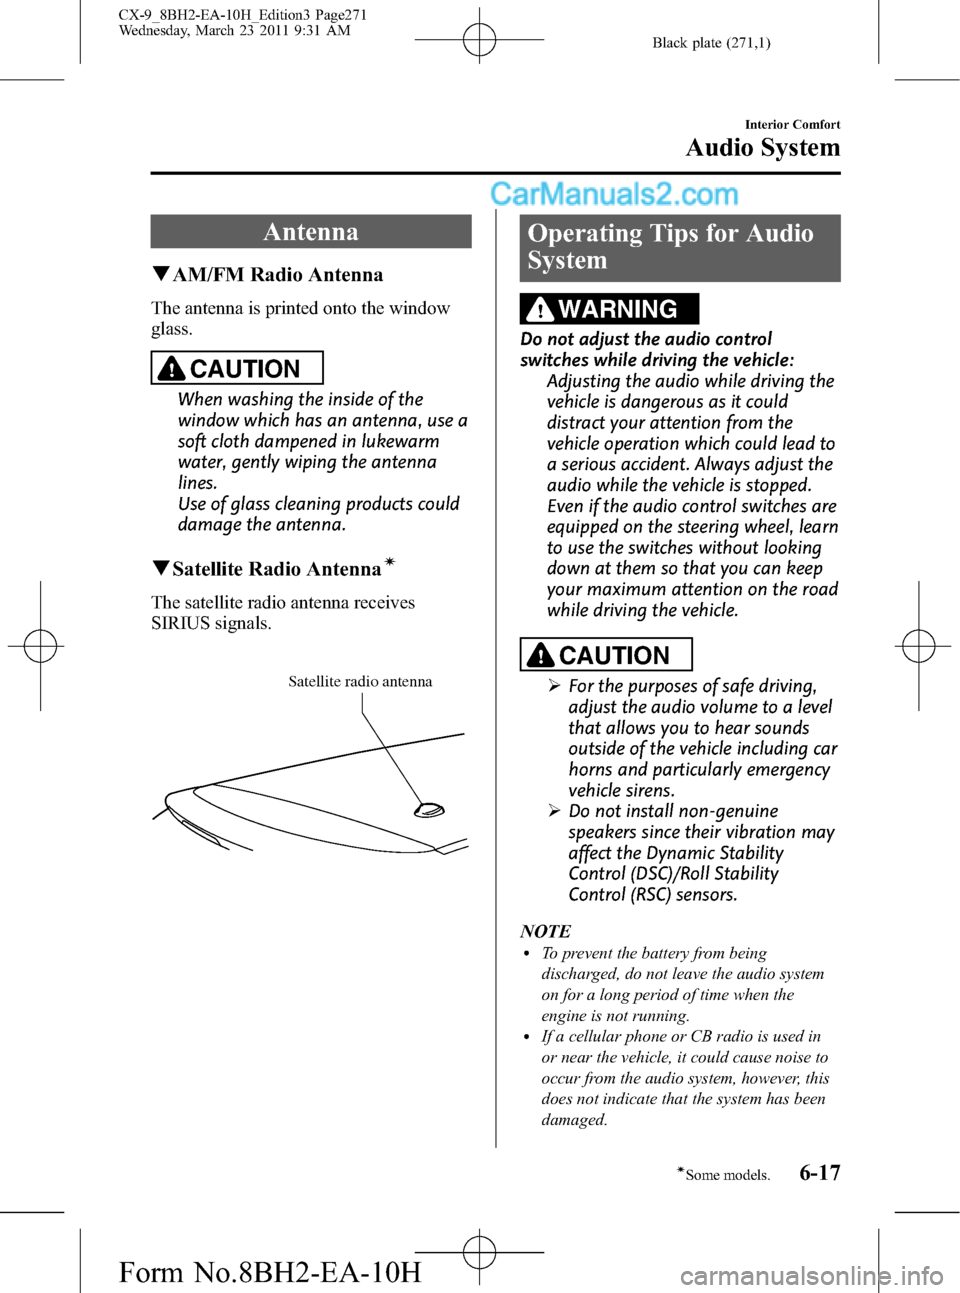 MAZDA MODEL CX-9 2011  Owners Manual (in English) Black plate (271,1)
Antenna
qAM/FM Radio Antenna
The antenna is printed onto the window
glass.
CAUTION
When washing the inside of the
window which has an antenna, use a
soft cloth dampened in lukewarm